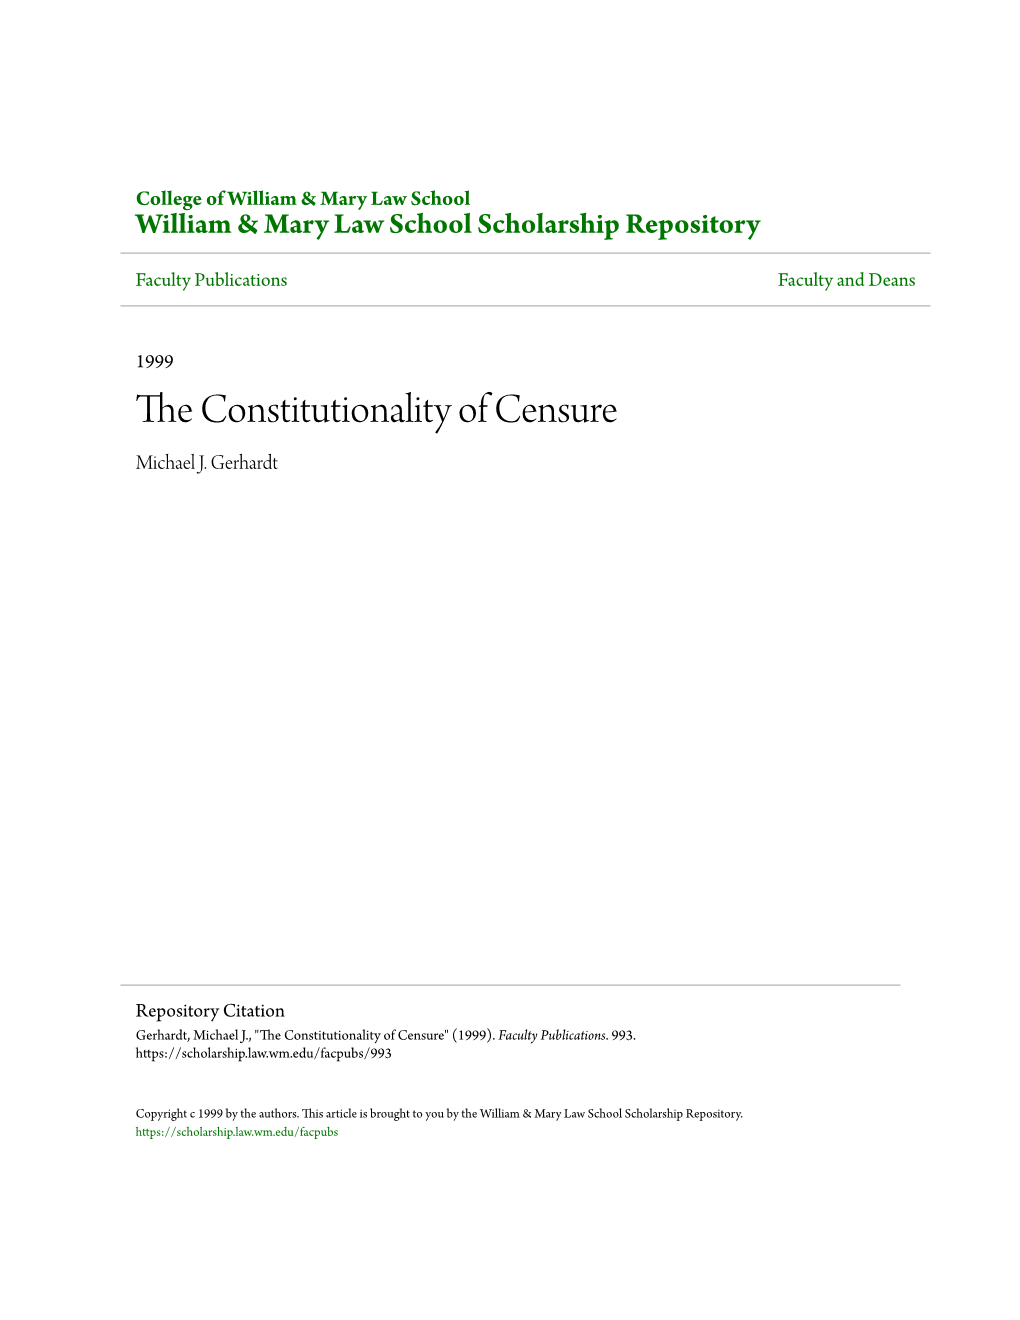 The Constitutionality of Censure